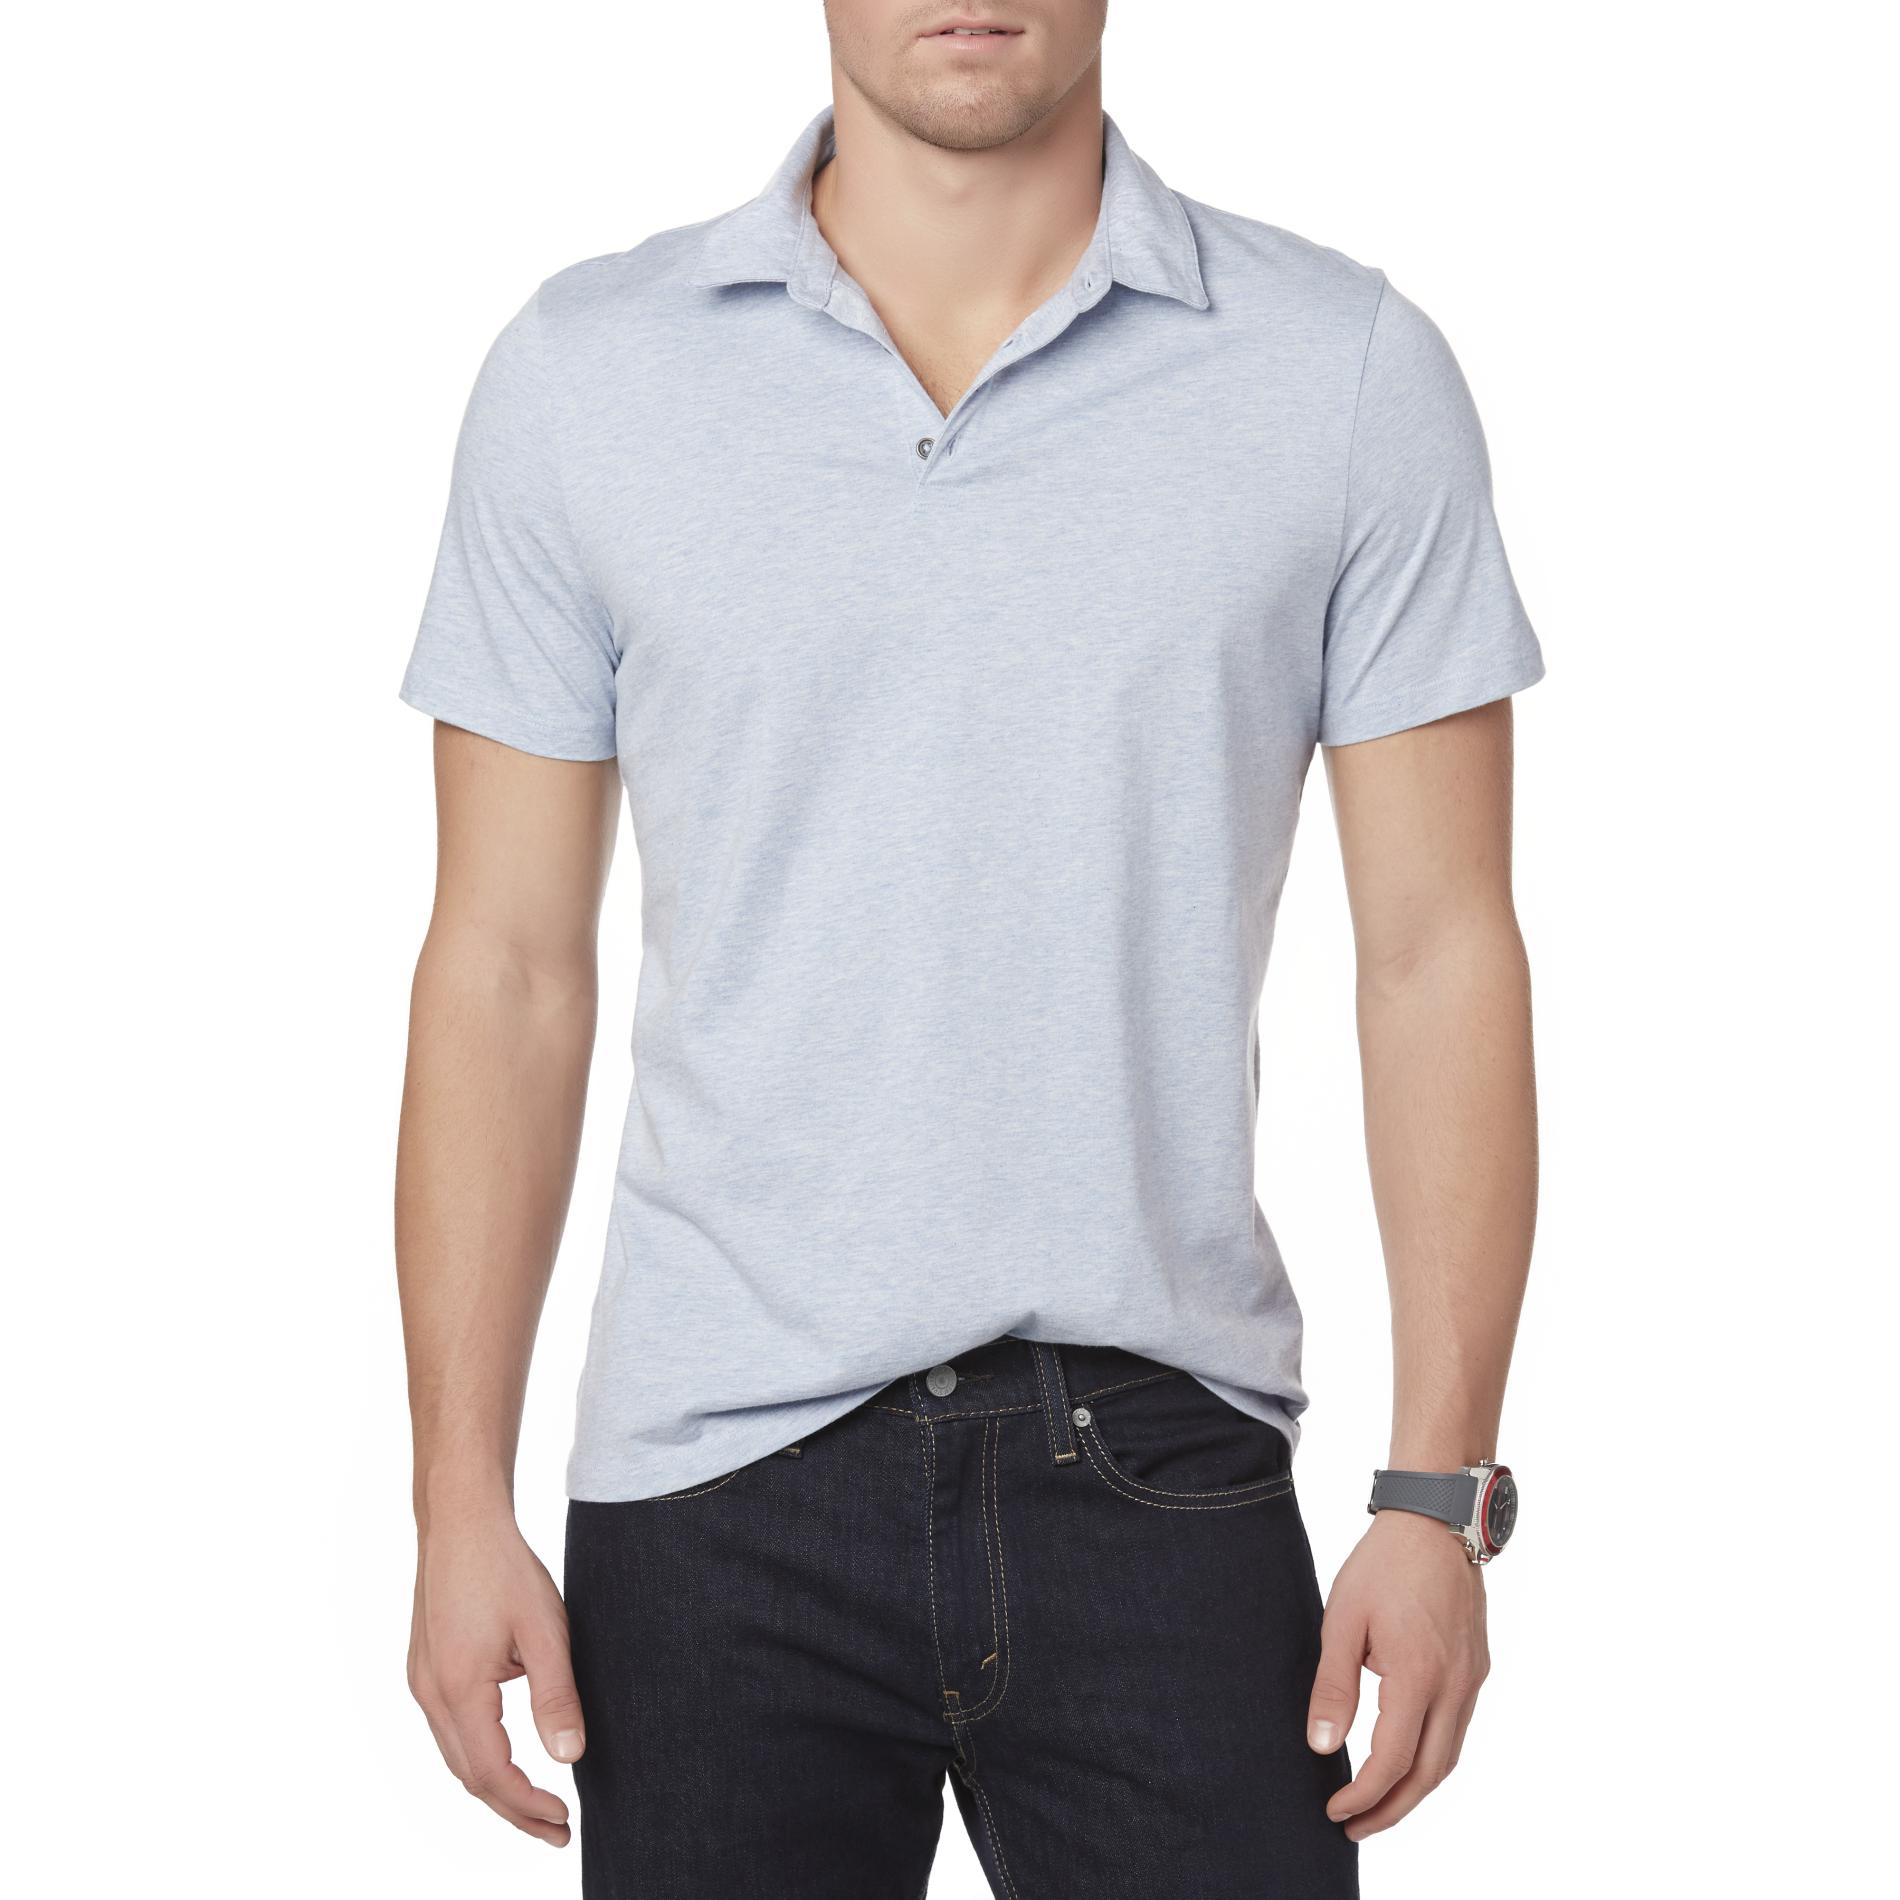 Structure Men's Slim Fit Polo Shirt - Heathered